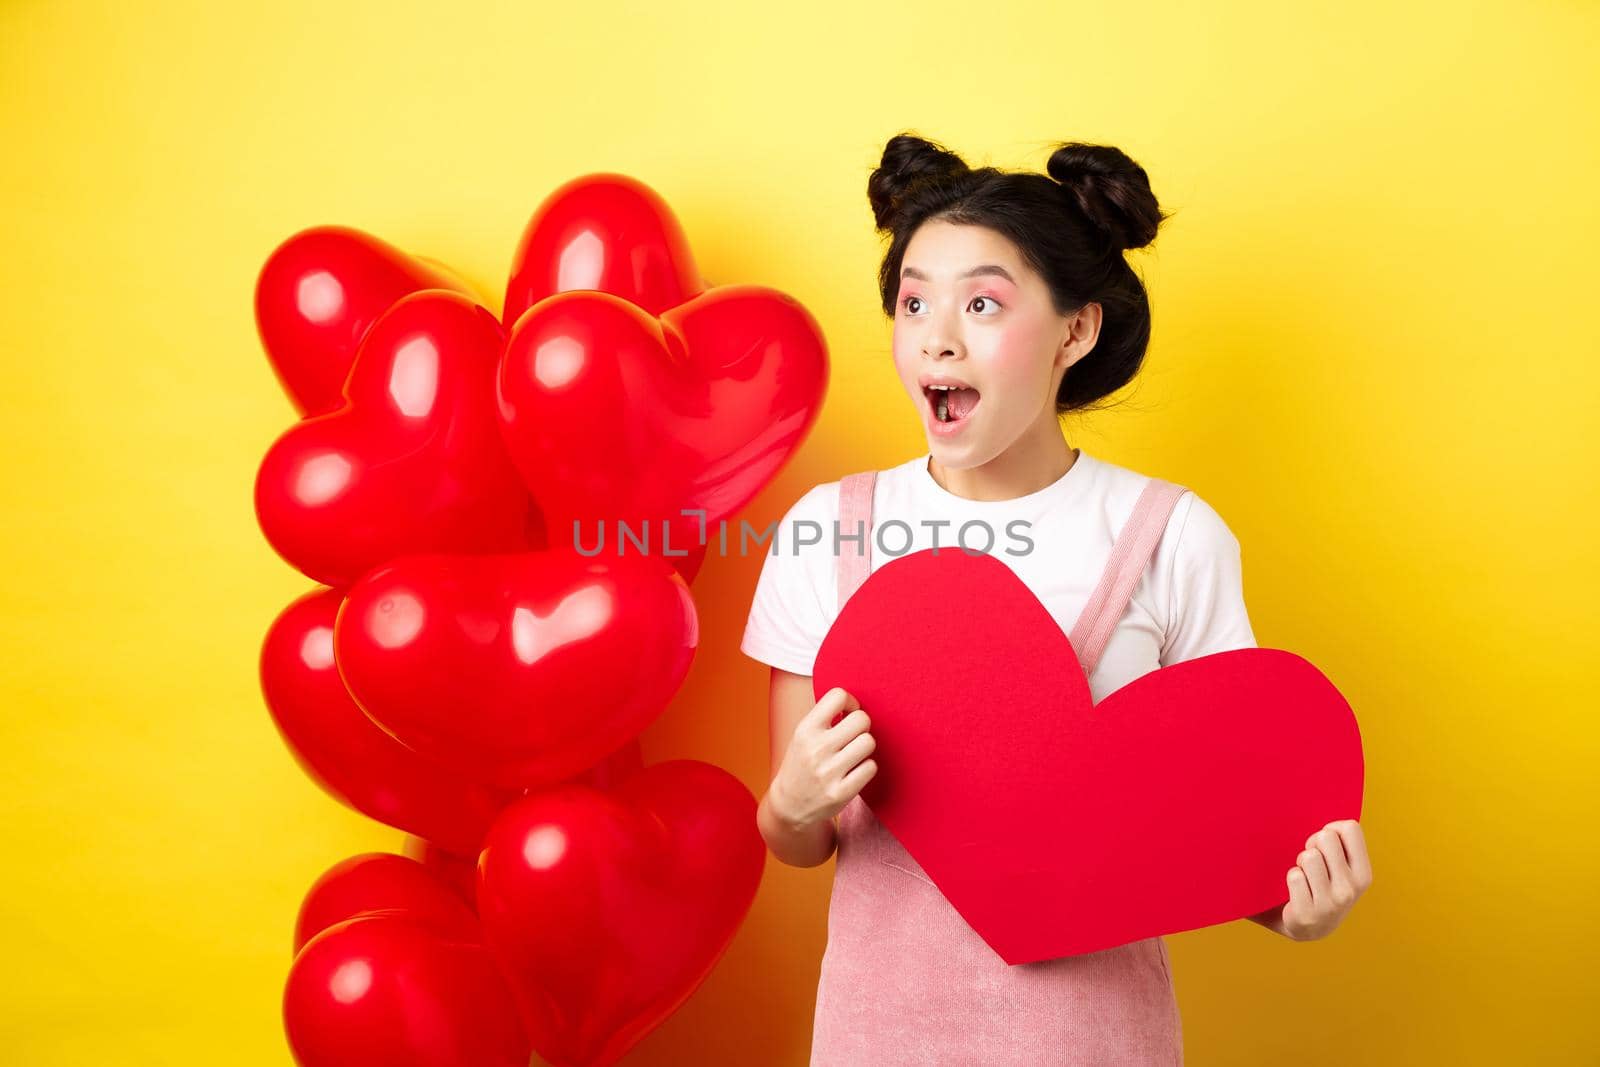 Happy Valentines day. Excited and surprised asian girl checking out romantic offer, looking left cheerful, showing big red heart card, yellow background.